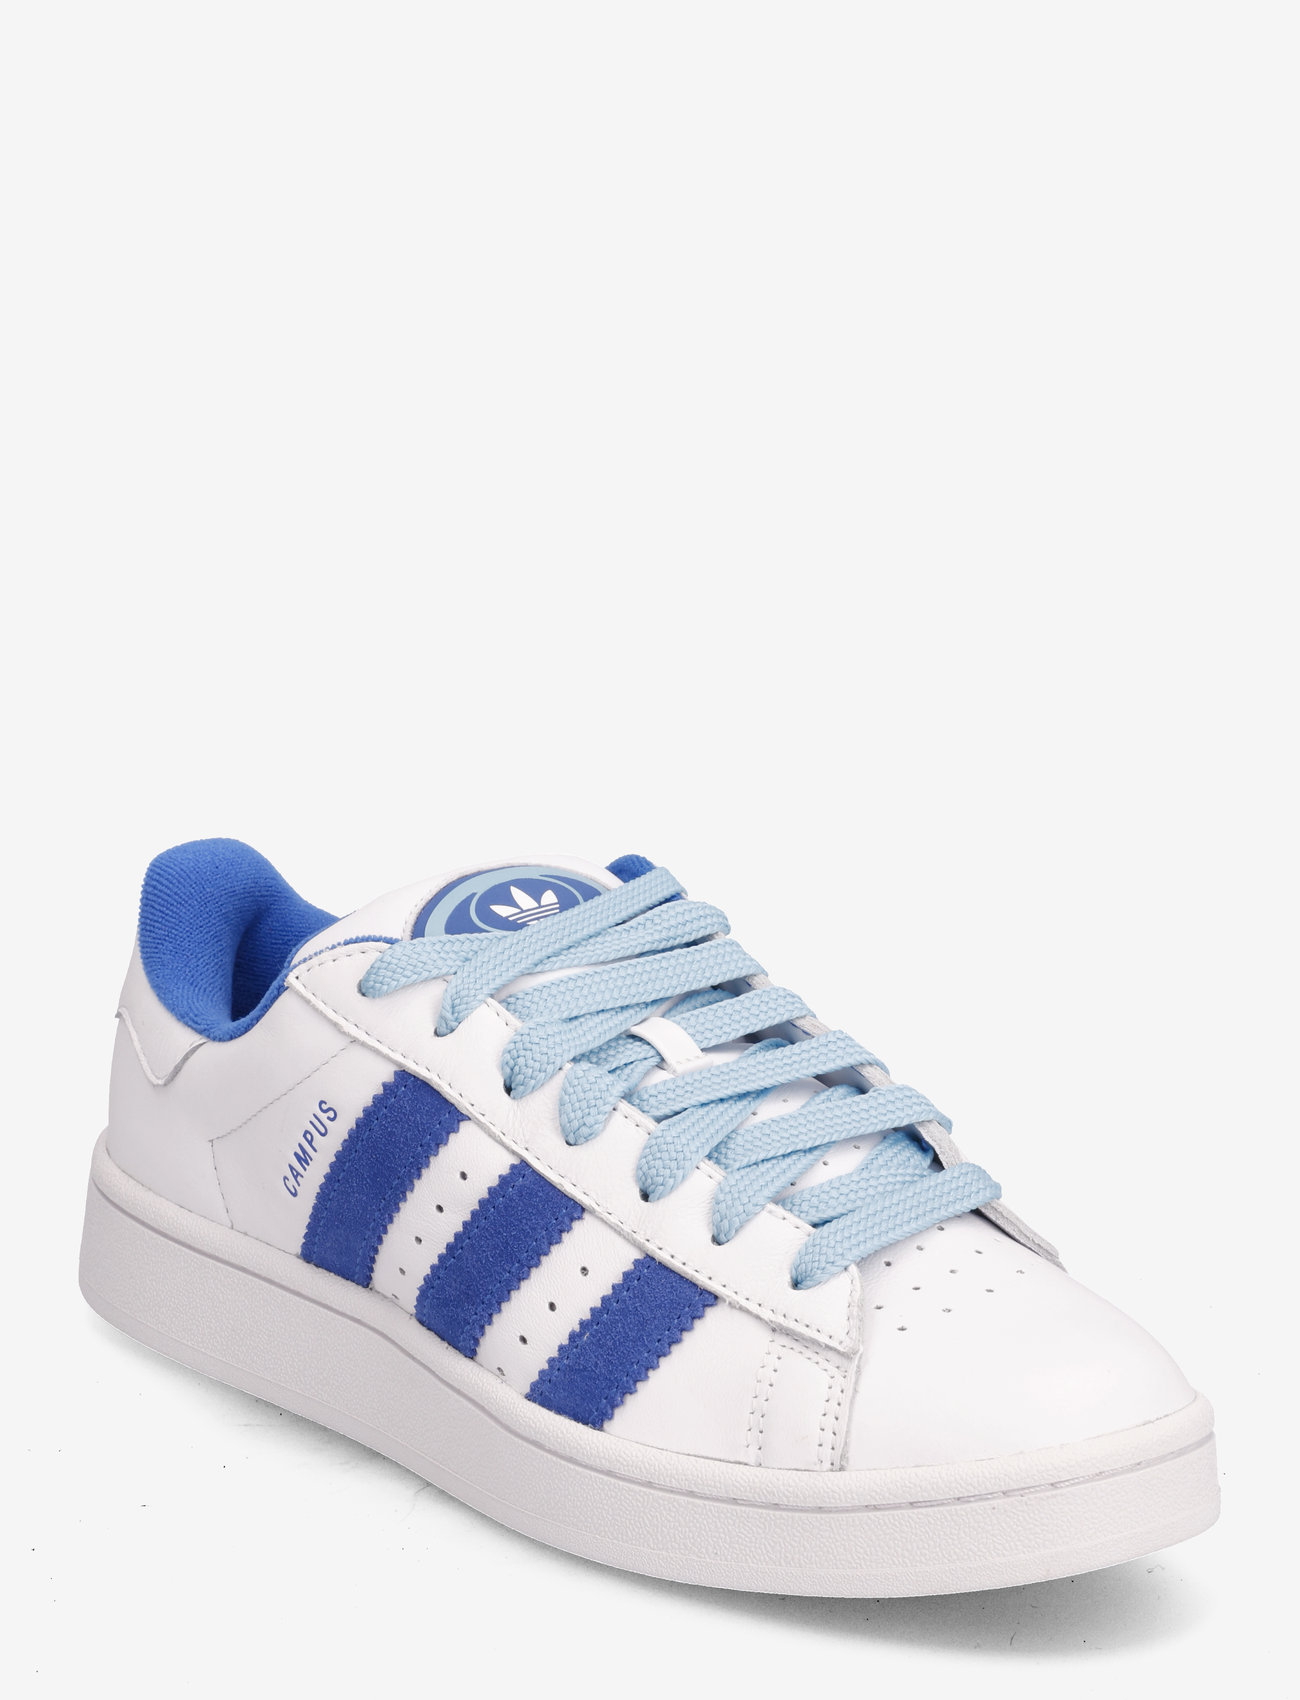 adidas Originals - CAMPUS 00s - lage sneakers - ftwwht/blue/brblue - 0